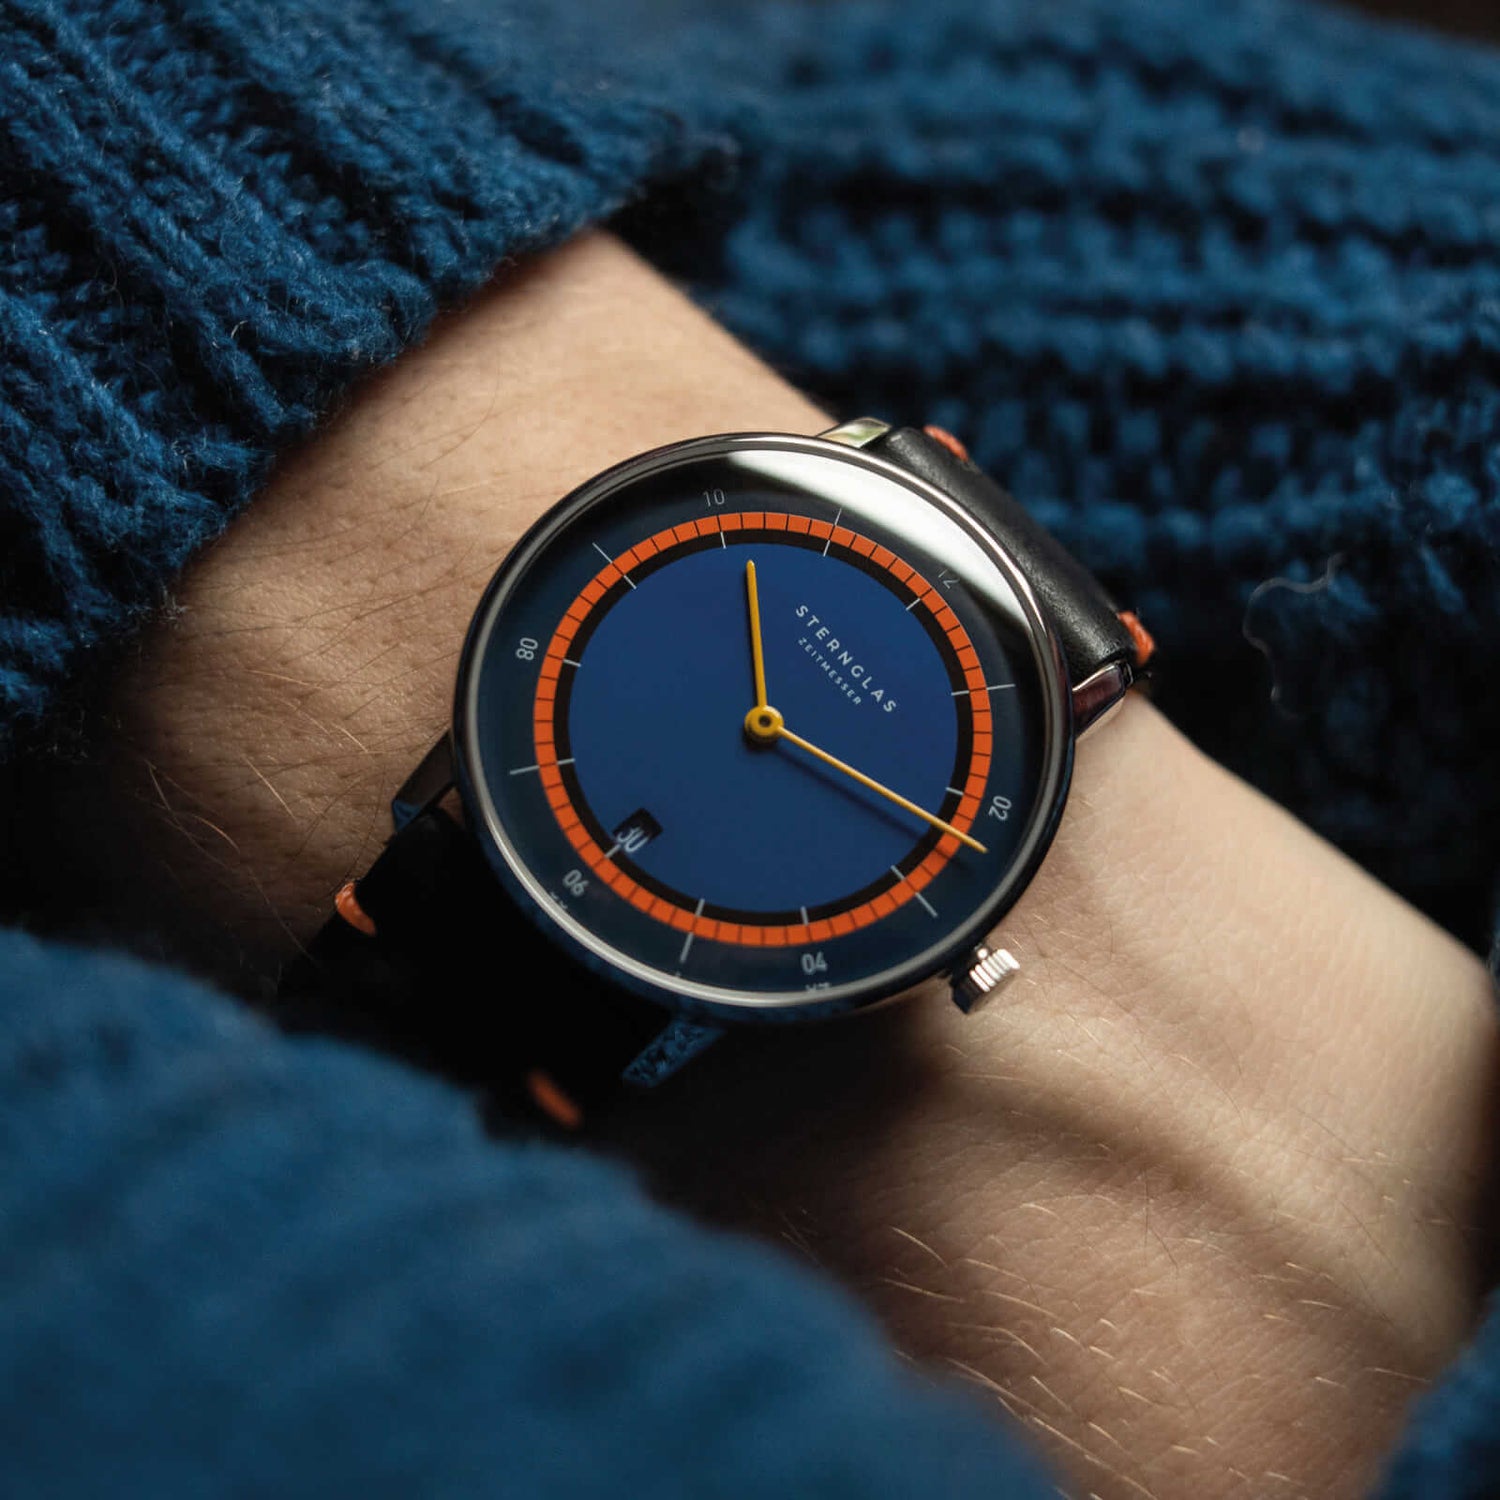 popup|Matthias has a wrist size of 18.5 cm/7.2 in|The "Vintage" strap - made in Germany - impresses with its striking cut edge and the two-tone 'pull-up effect'.